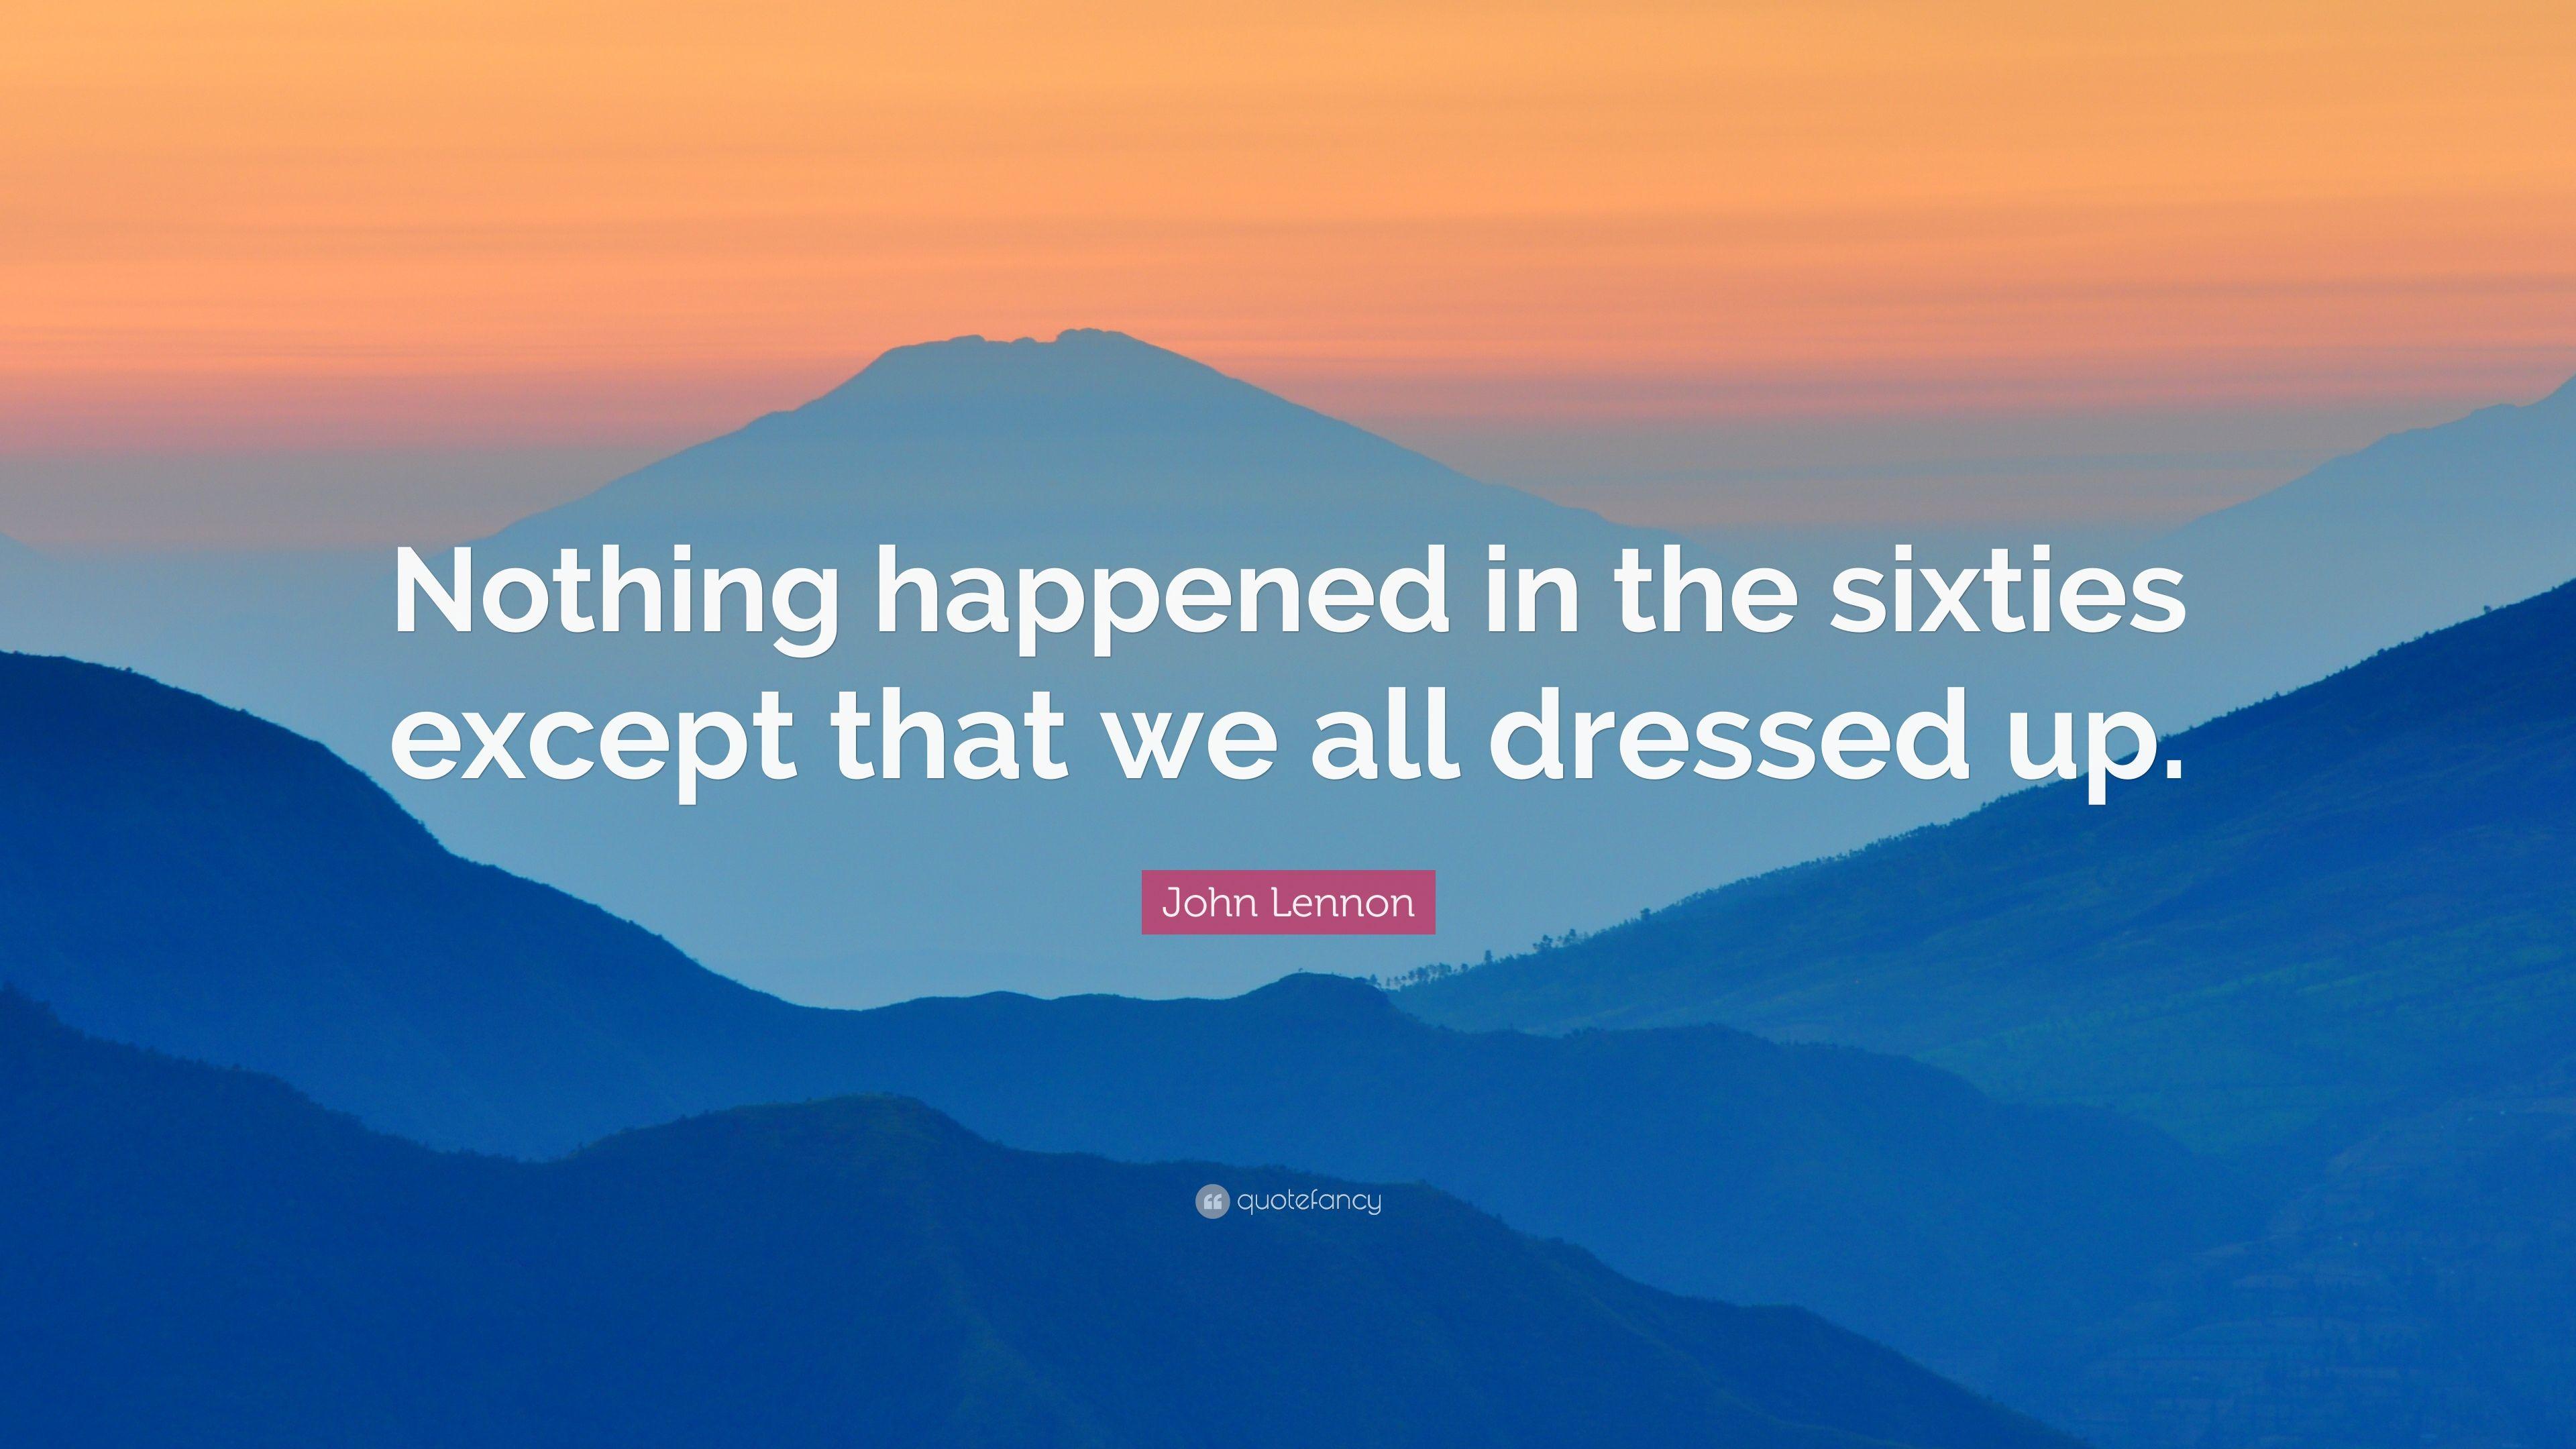 John Lennon Quote: “Nothing happened in the sixties except that we